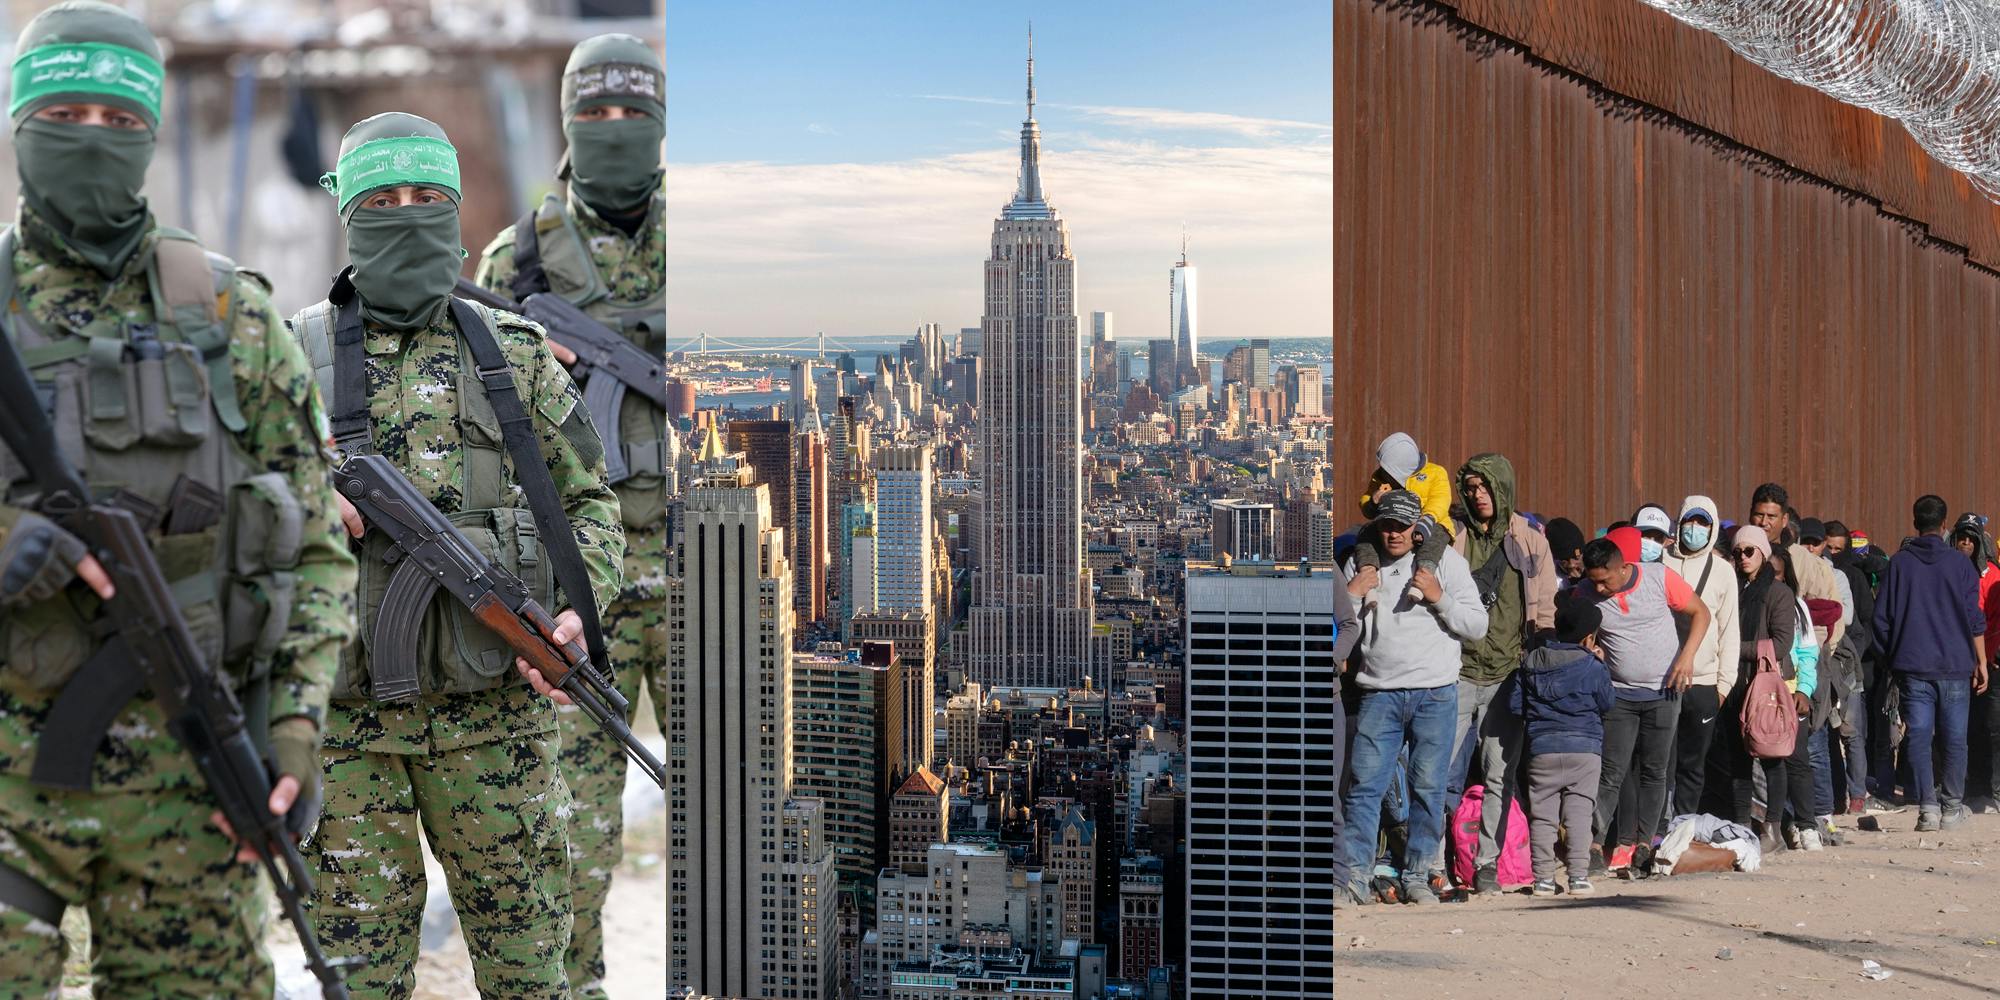 Members of Hamas(l), New York City Aerial(c), Migrants lined up(r)